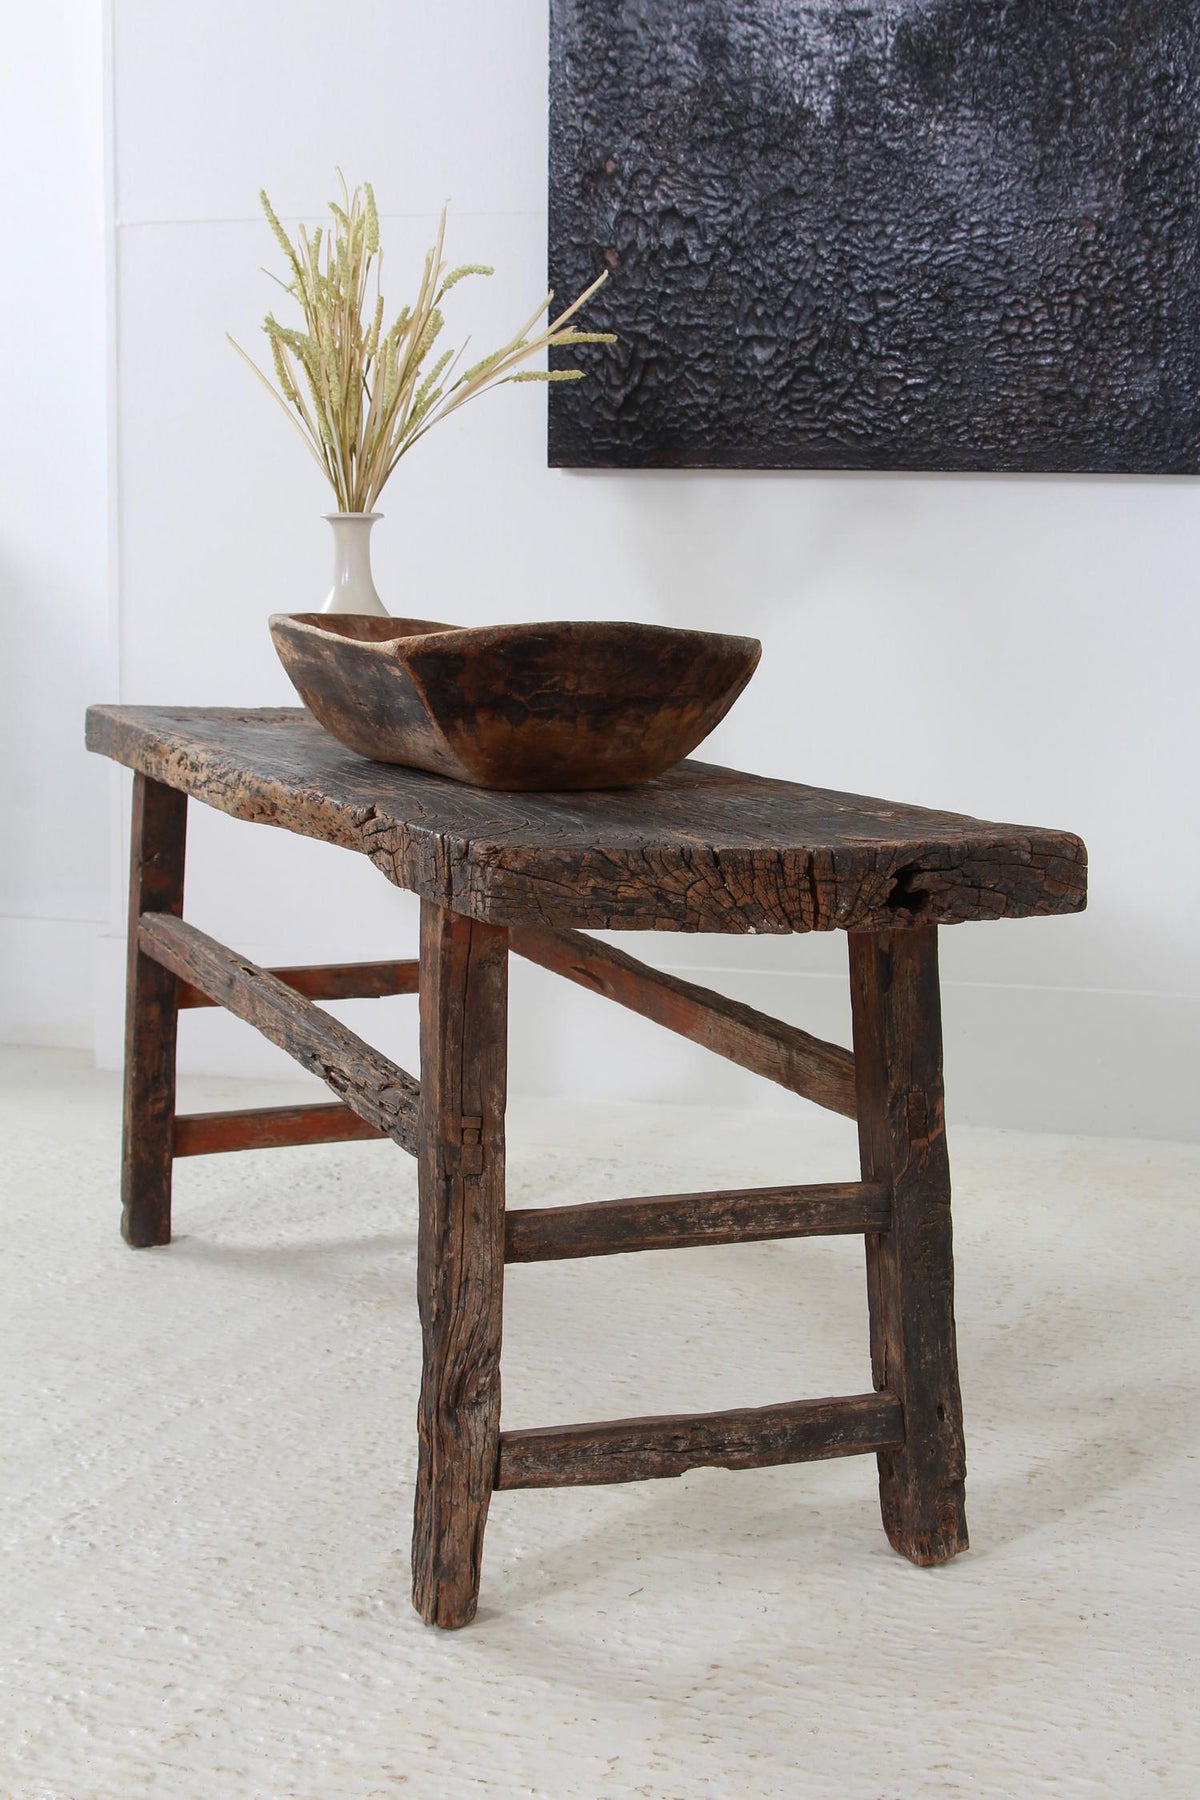 Rustic Primitive Bench with Traces of Old Black Paint